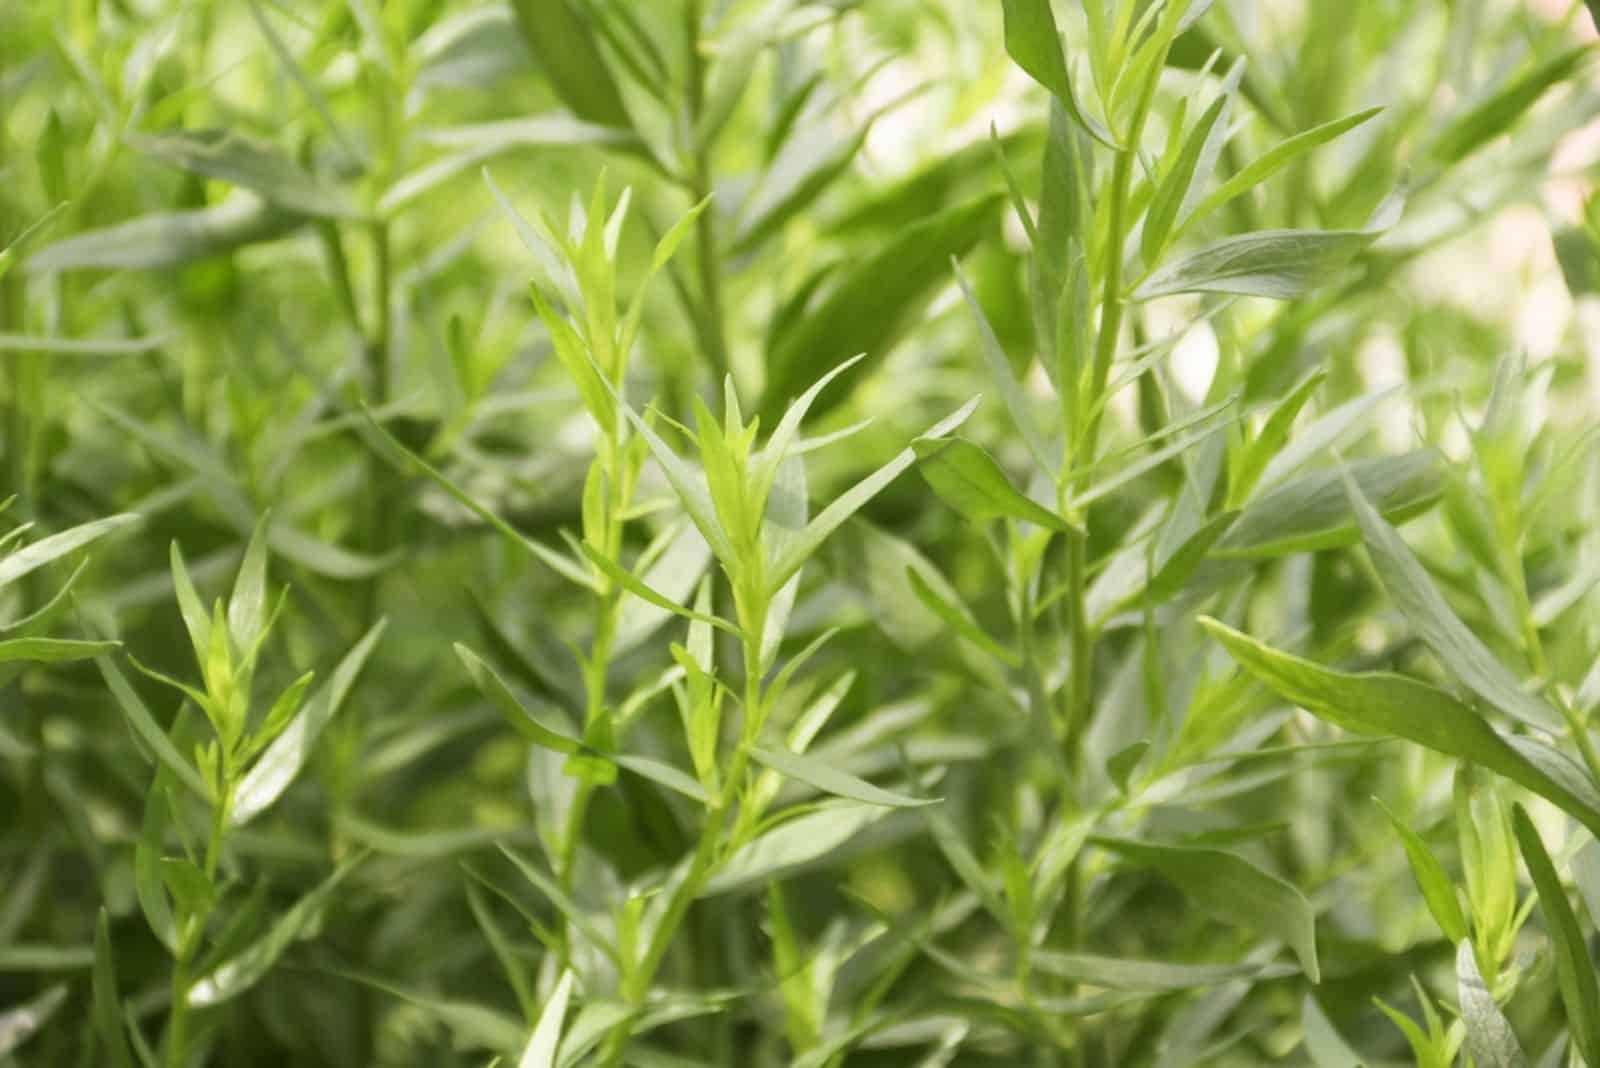 Green herb of the medicinal and food plant Artemisia tarragon